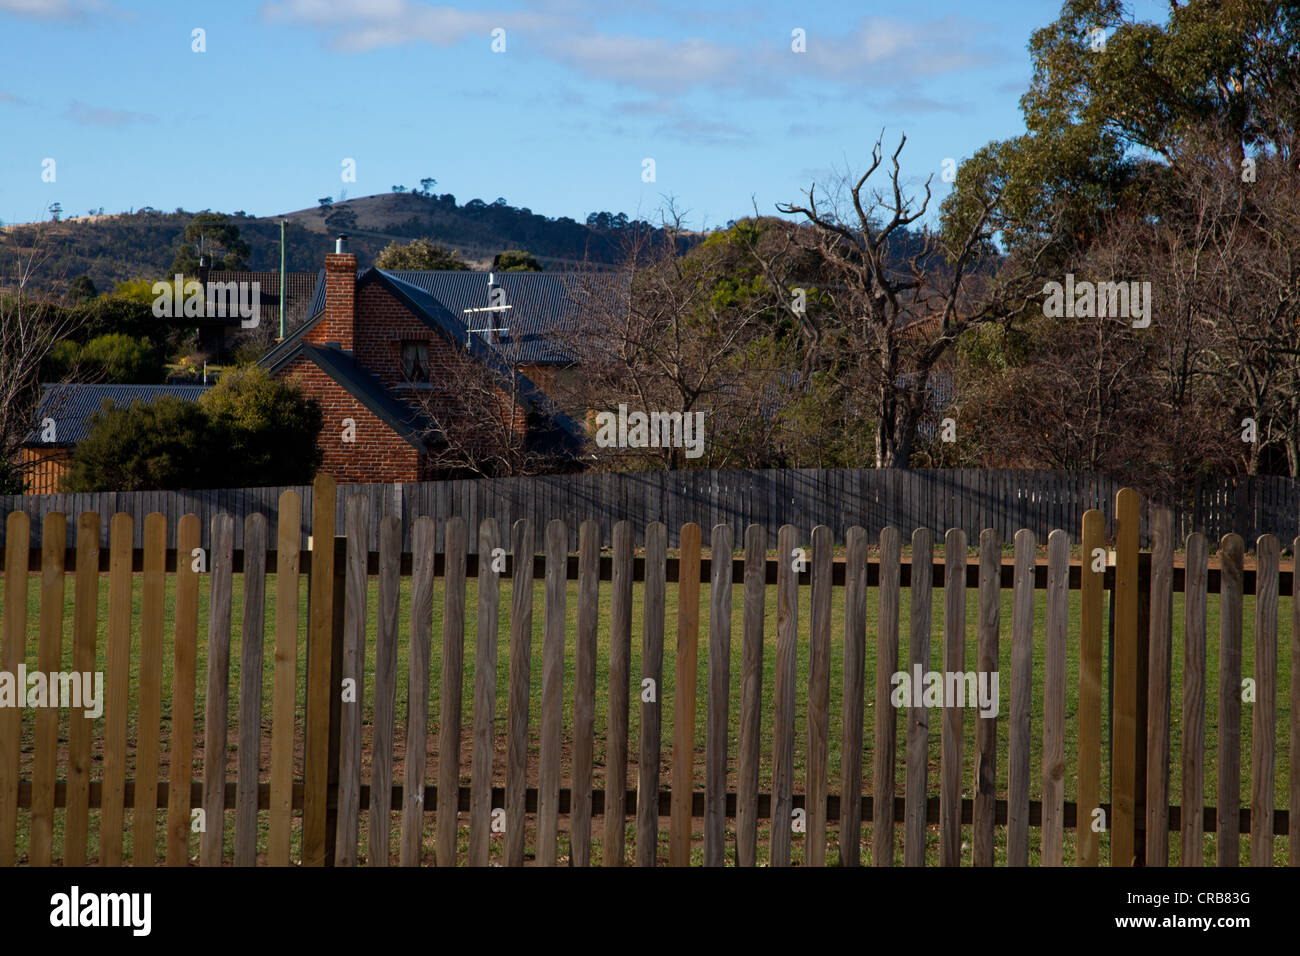 View of house and trees with wooden fence in the foreground, Tasmania, Australia Stock Photo